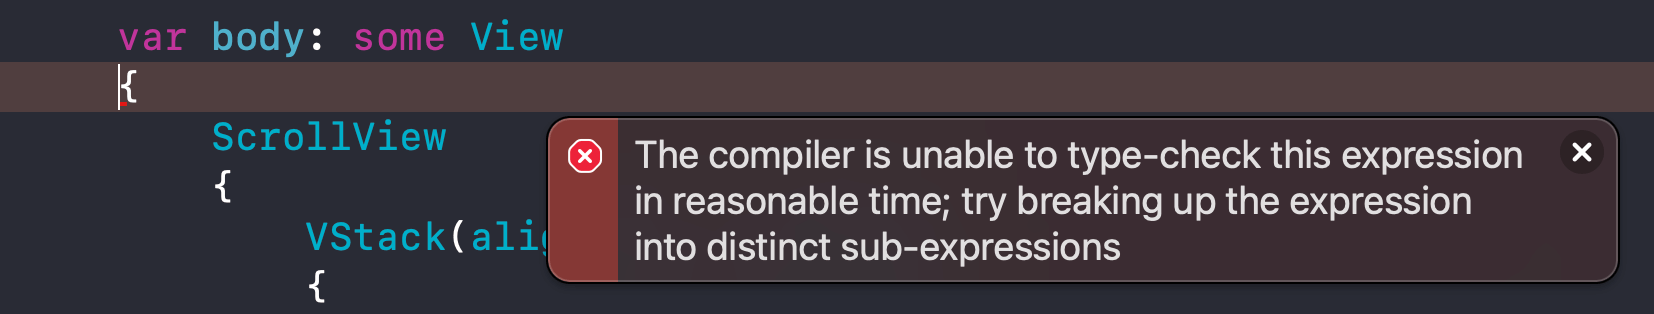 The compiler is unable to type-check this expression in reasonable time; try breaking up the expression into distinct sub-expressions.